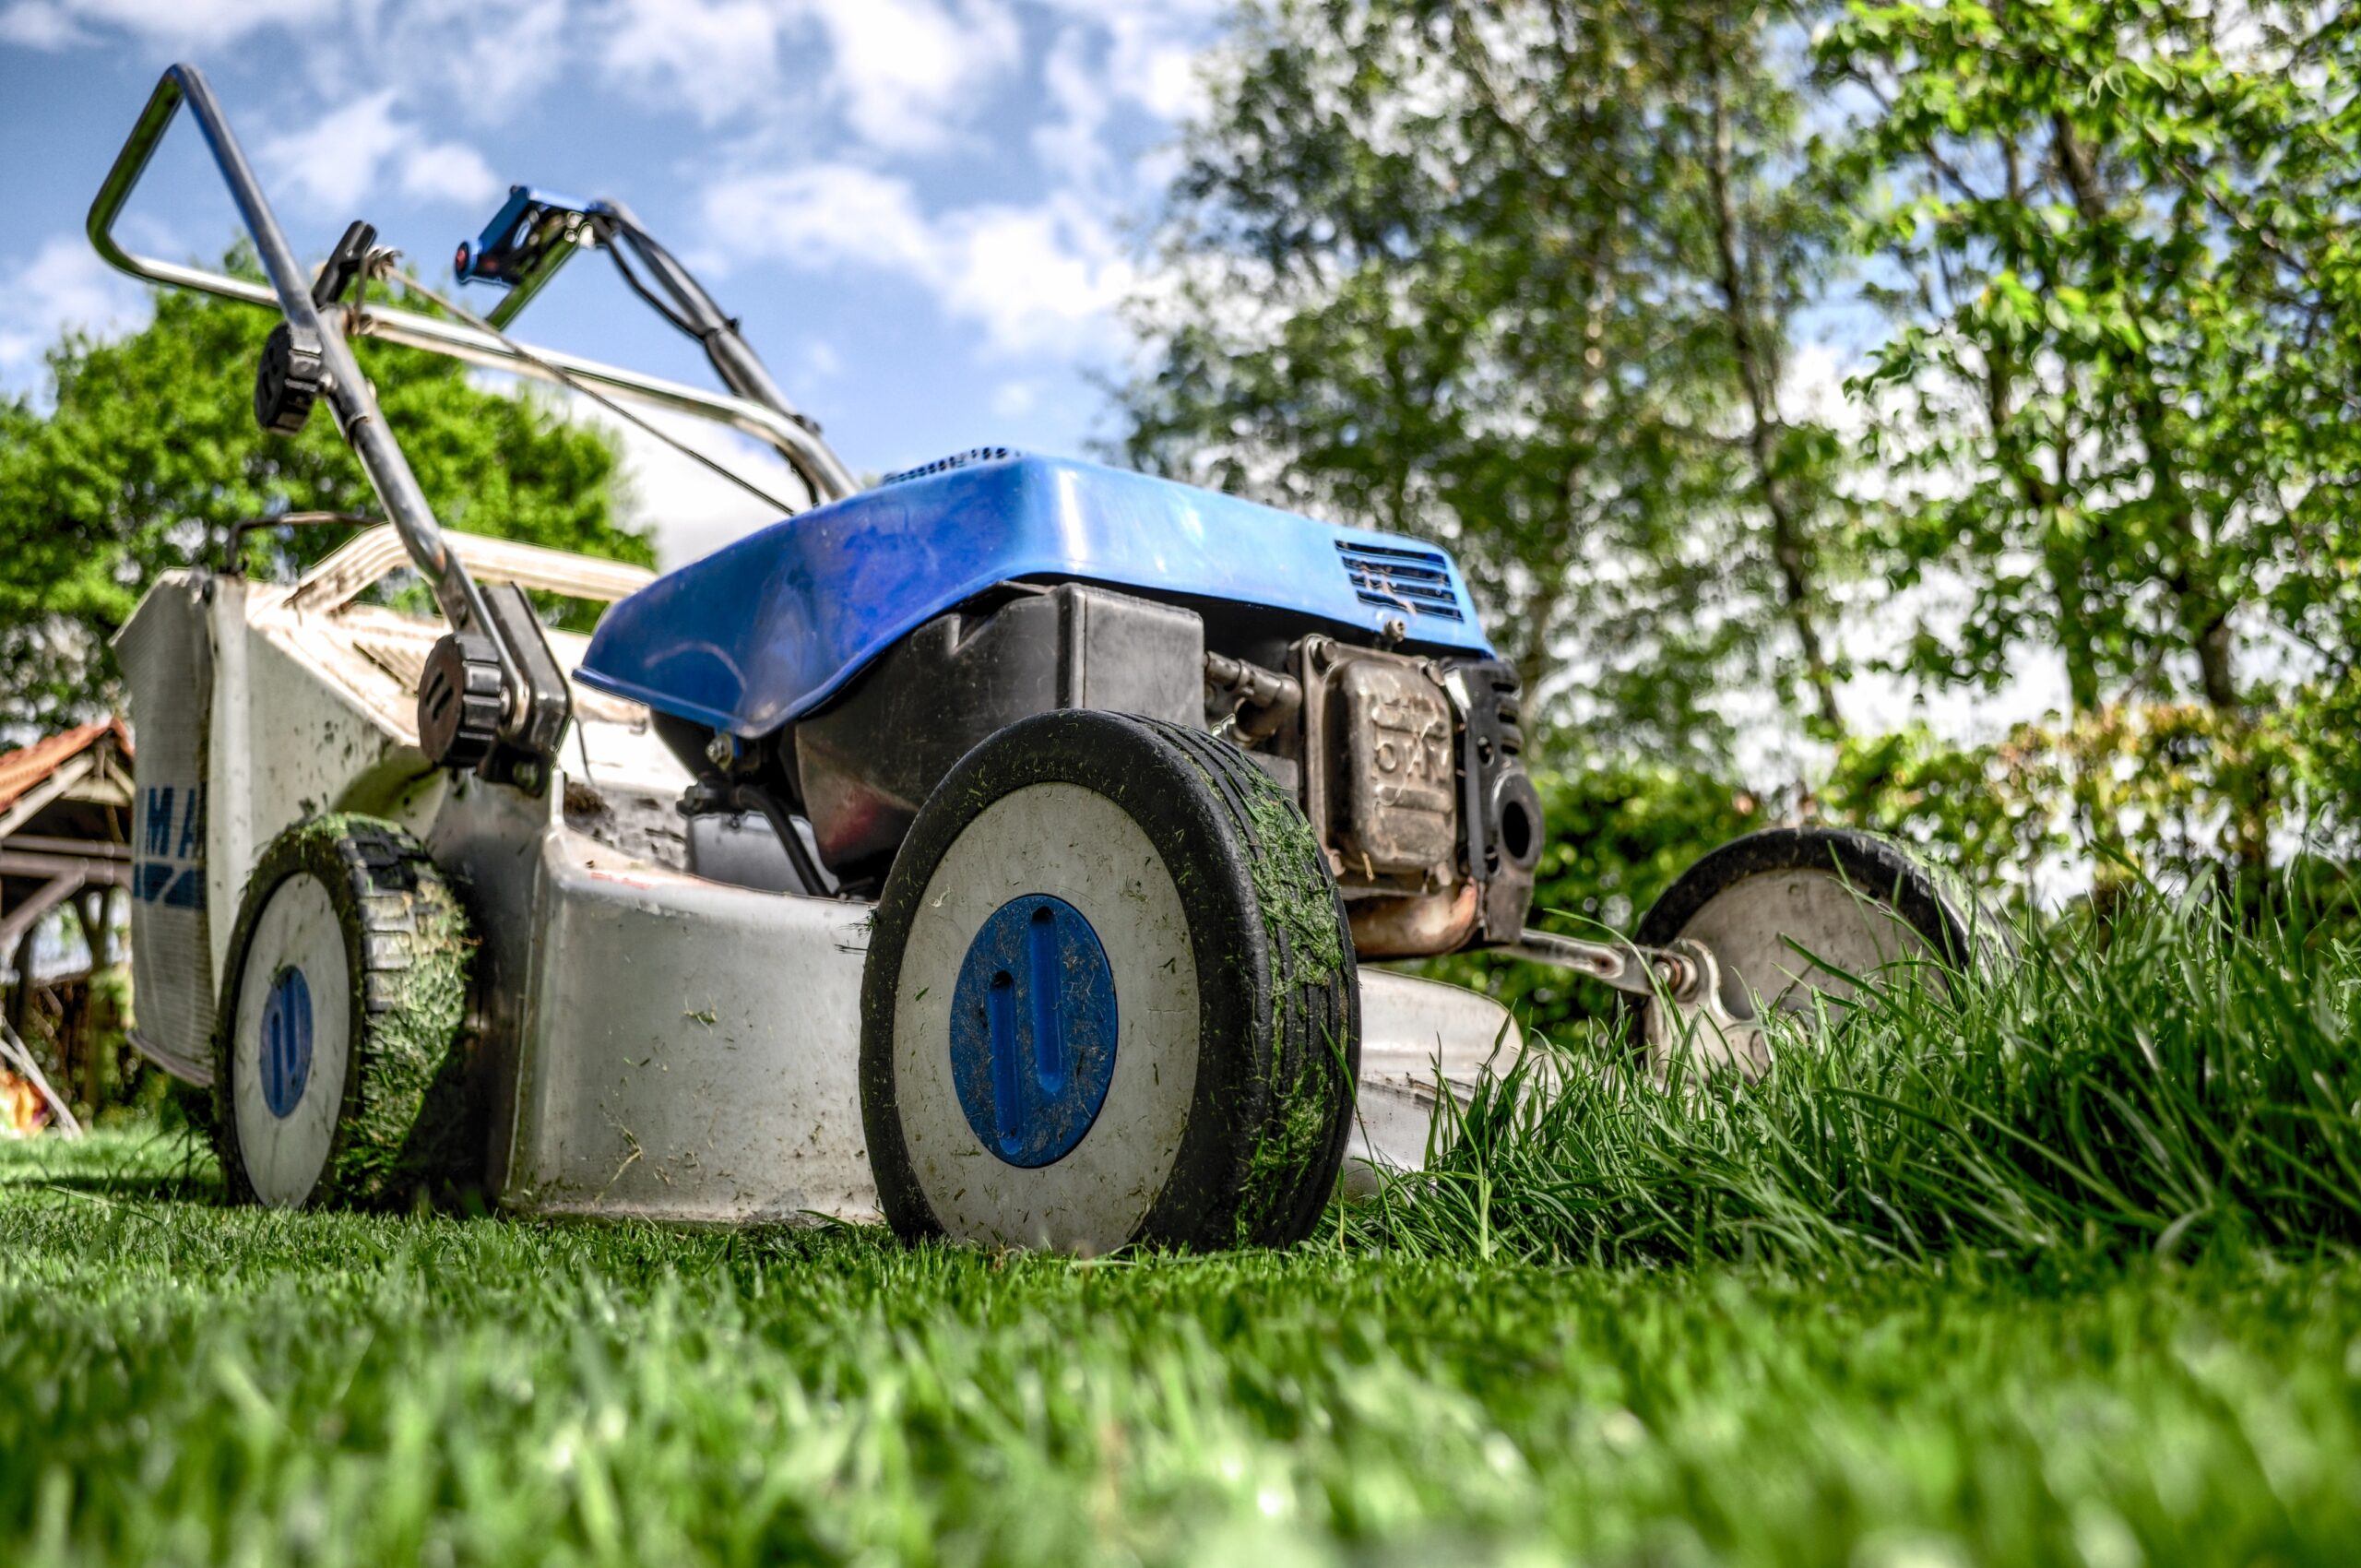 storing your lawn equipment